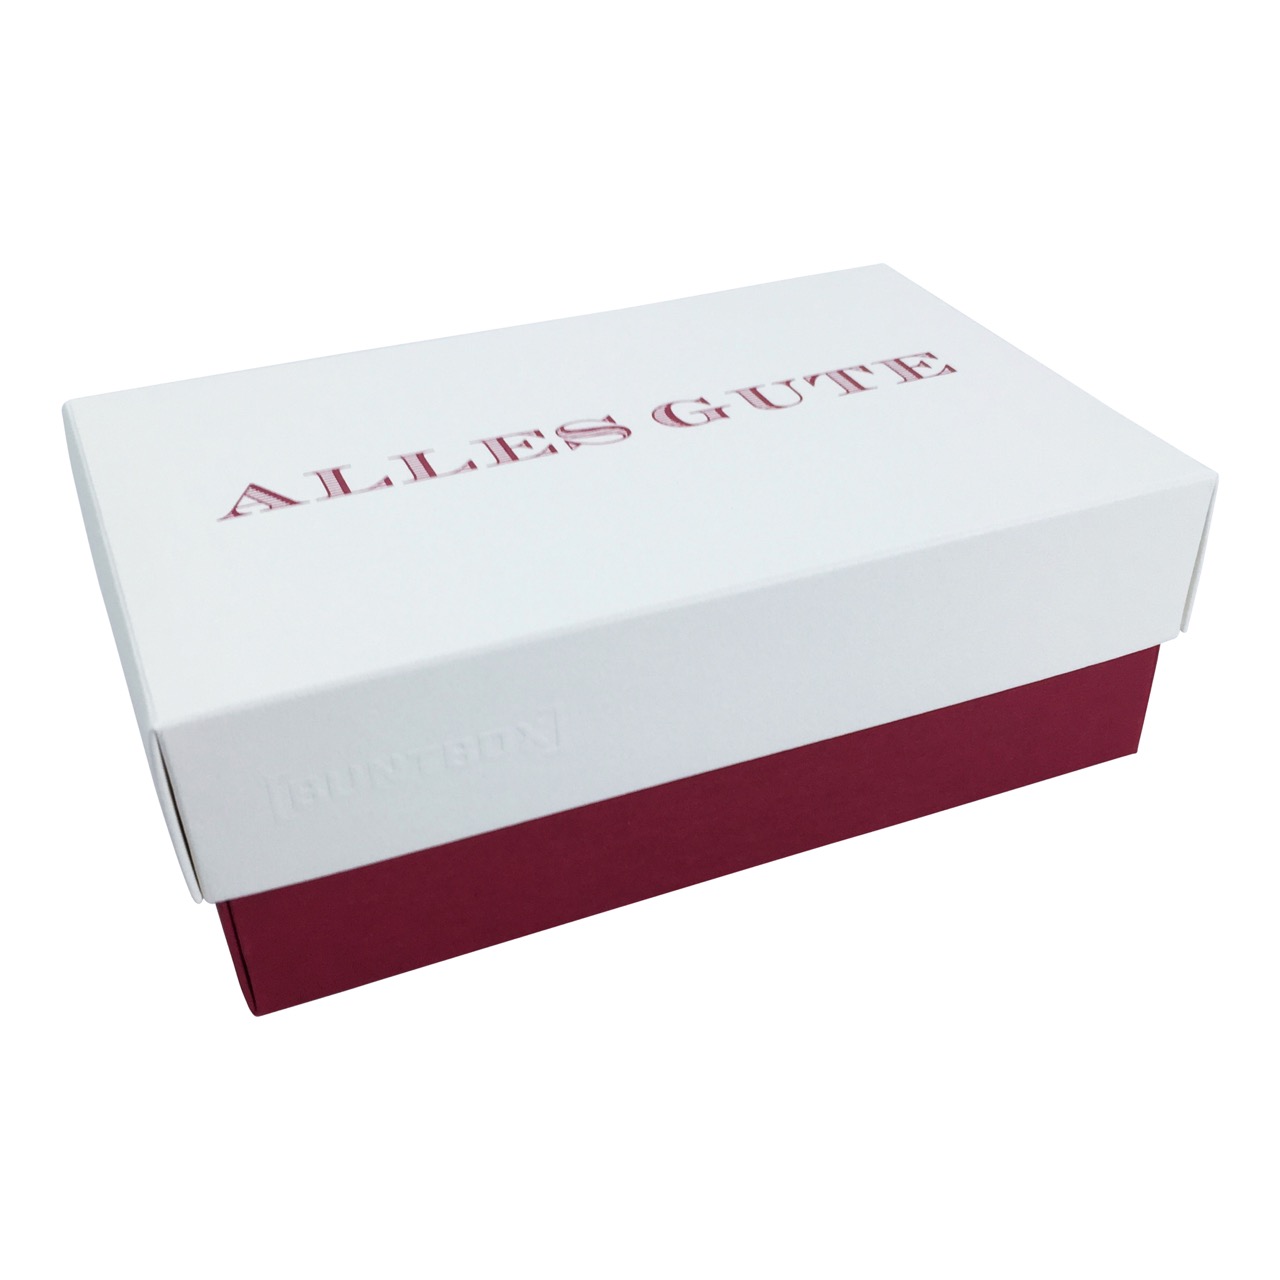 Fine Paper Edition Buntbox Champagner - Bordeaux 'Alles Gute' - Rot